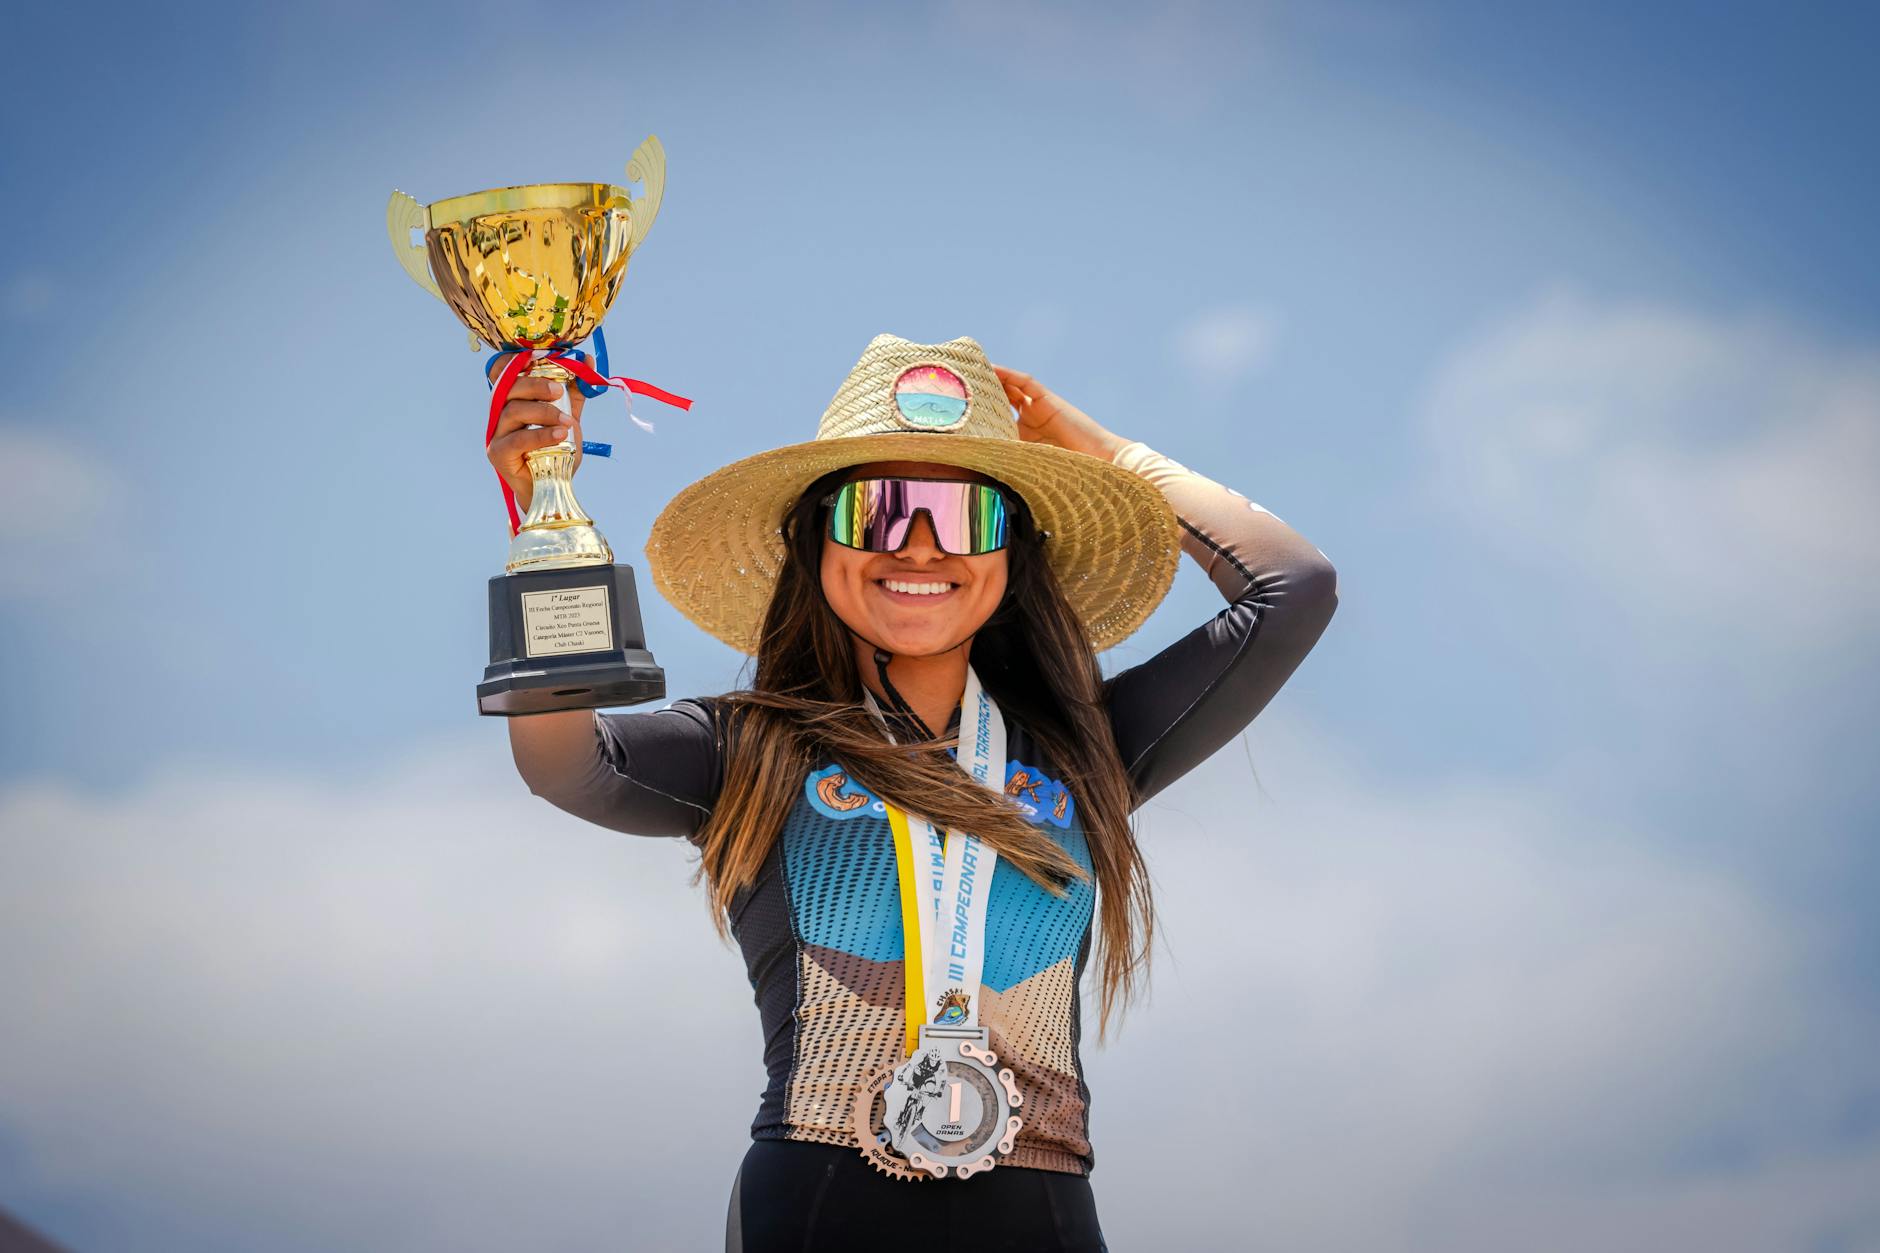 Smiling Sportswoman with Medals and Golden Trophy